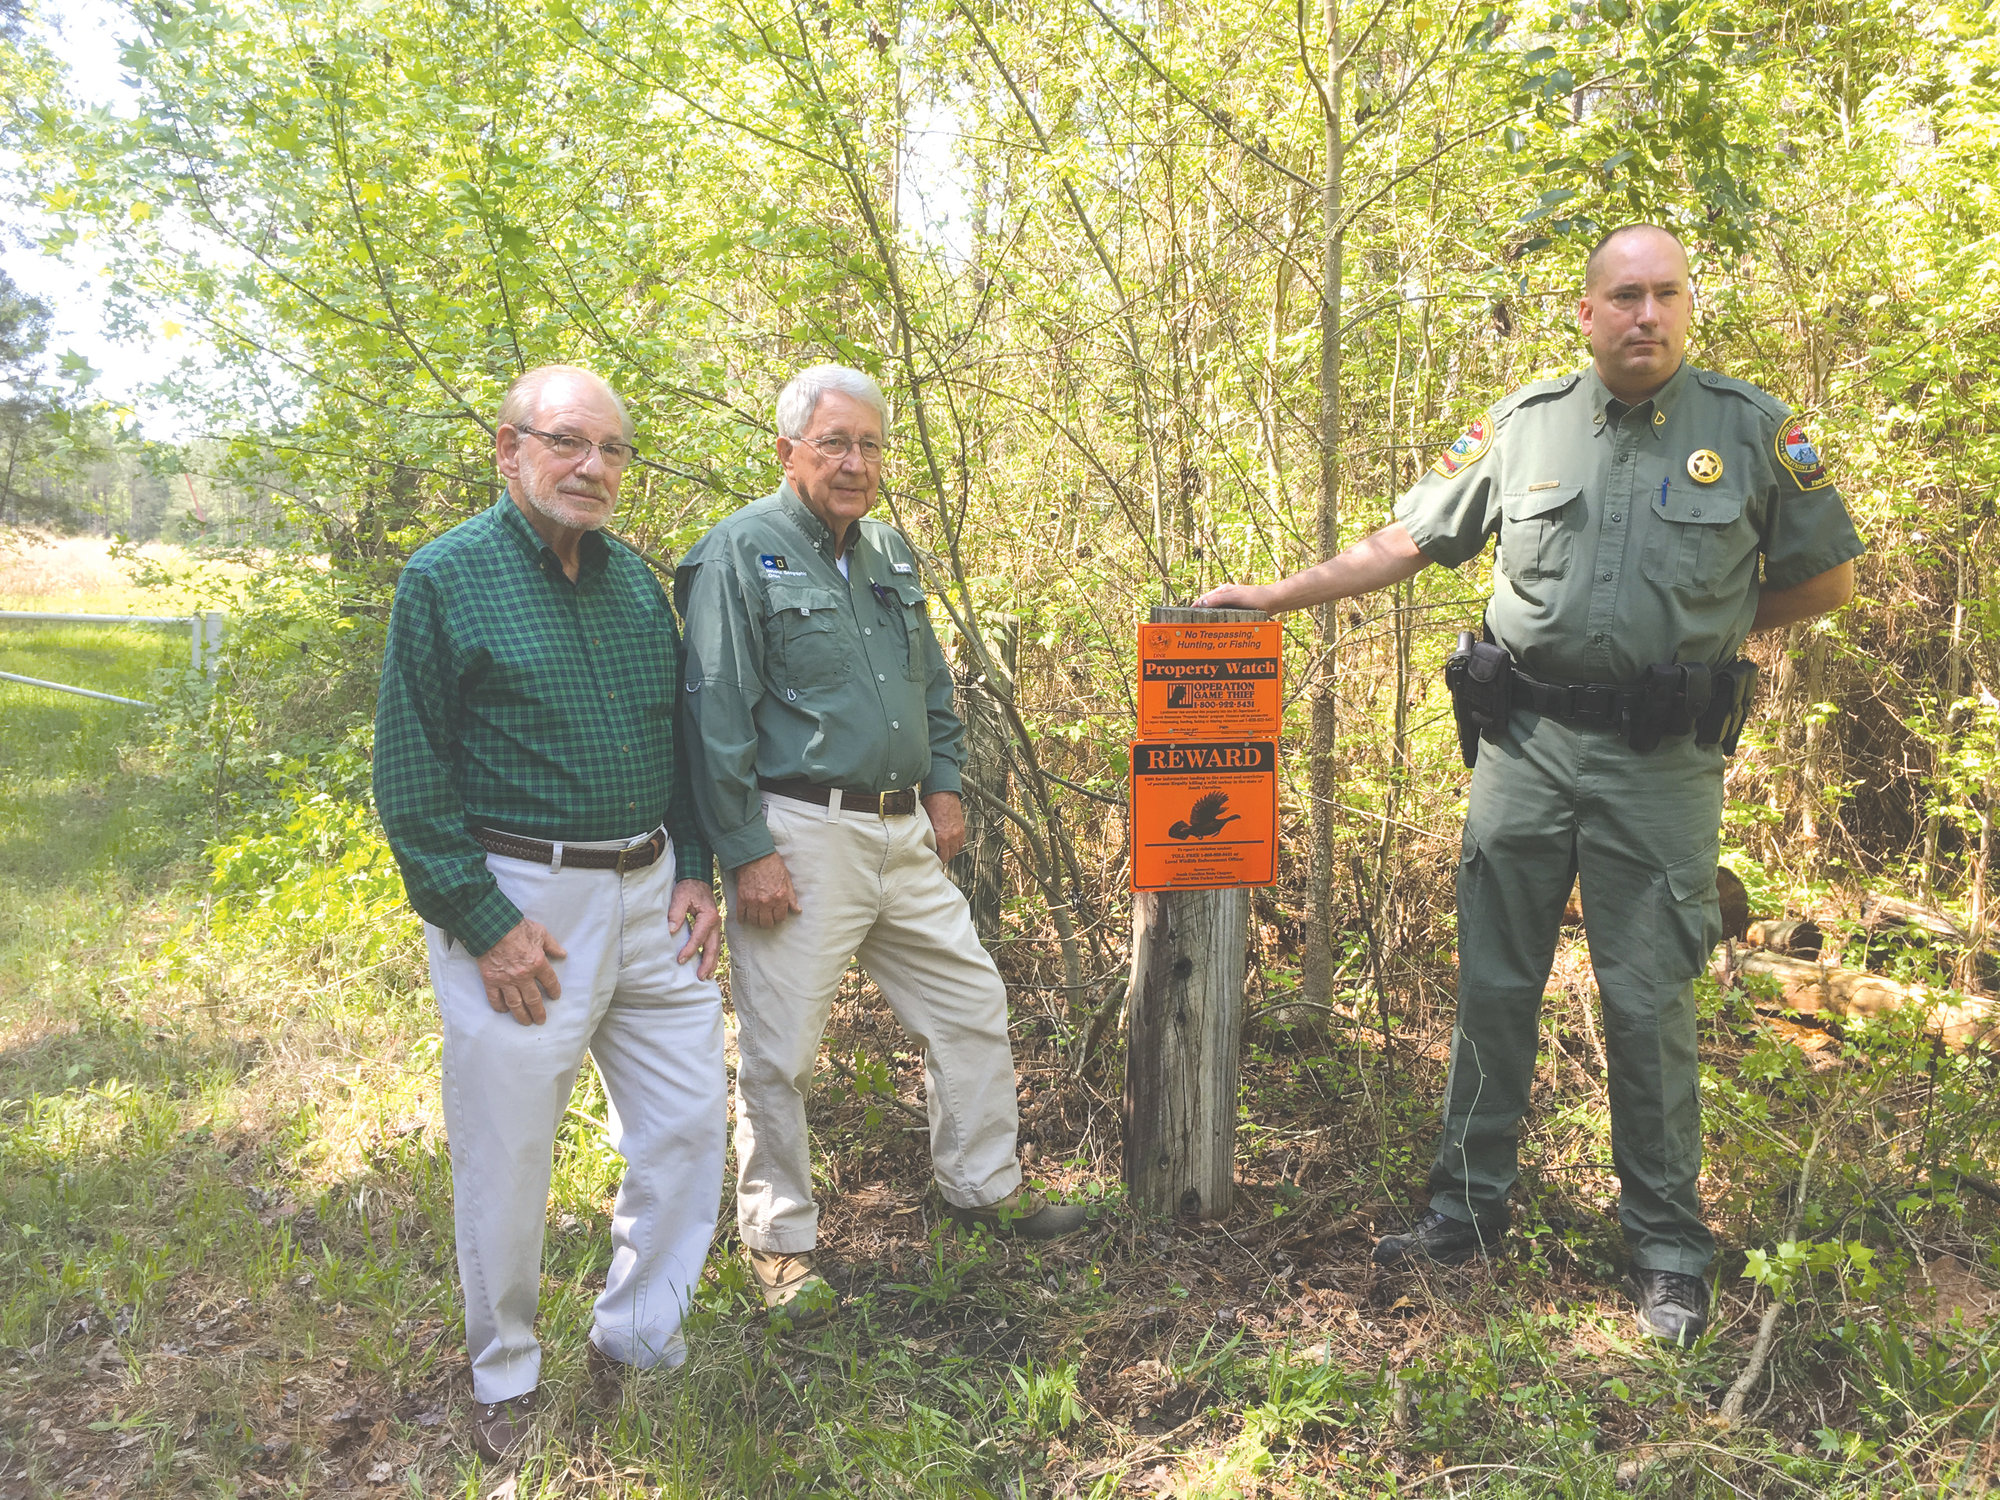 Landowners Marvin Davant, Hugh Ryan and SCDNR Officer Ed Laney are seen at the posted entrance to a rural property.